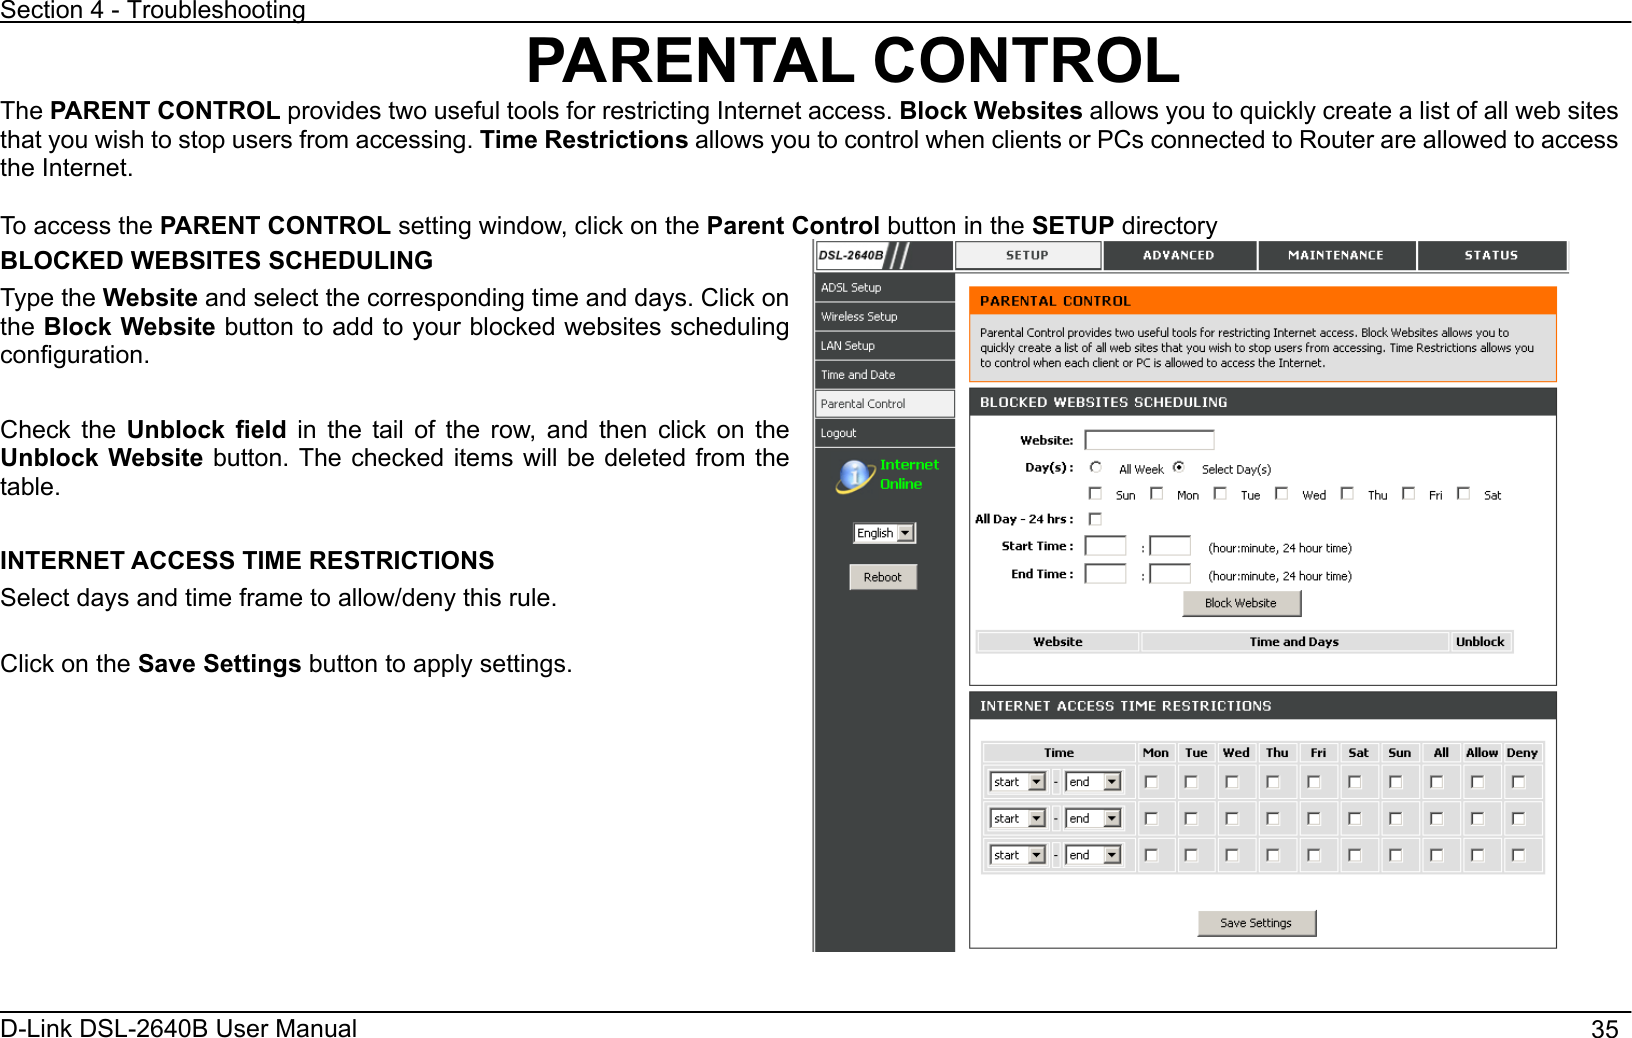 Section 4 - Troubleshooting D-Link DSL-2640B User Manual                                       35PARENTAL CONTROL The PARENT CONTROL provides two useful tools for restricting Internet access. Block Websites allows you to quickly create a list of all web sites that you wish to stop users from accessing. Time Restrictions allows you to control when clients or PCs connected to Router are allowed to access the Internet. To access the PARENT CONTROL setting window, click on the Parent Control button in the SETUP directory BLOCKED WEBSITES SCHEDULING Type the Website and select the corresponding time and days. Click on the Block Website button to add to your blocked websites scheduling configuration.Check the Unblock field in the tail of the row, and then click on the Unblock Website button. The checked items will be deleted from the table. INTERNET ACCESS TIME RESTRICTIONS Select days and time frame to allow/deny this rule. Click on the Save Settings button to apply settings. 